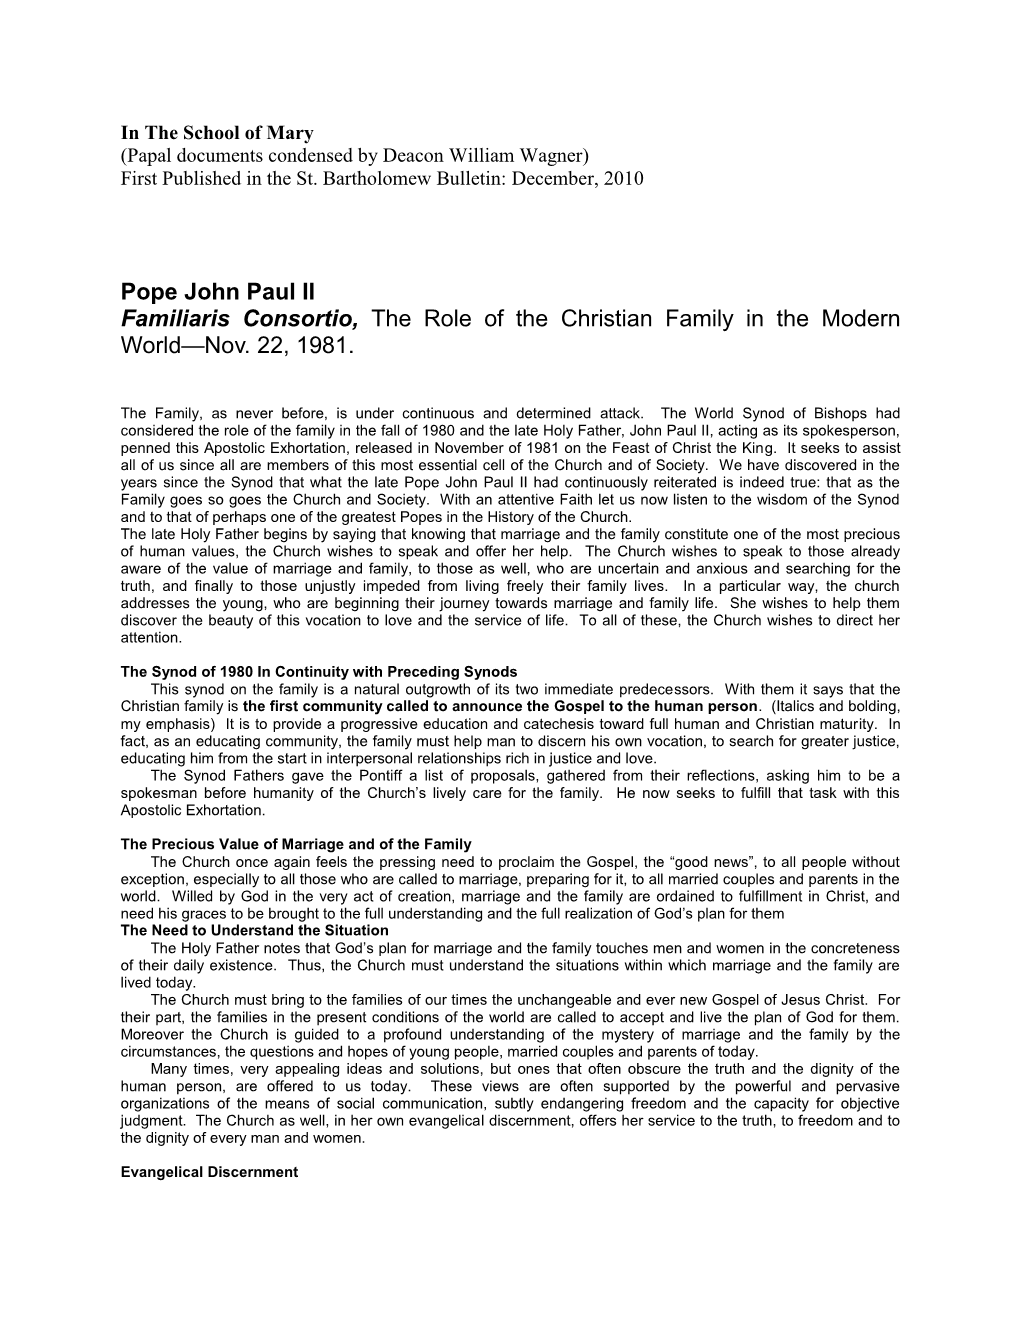 Pope John Paul II Familiaris Consortio, the Role of the Christian Family in the Modern World—Nov. 22, 1981